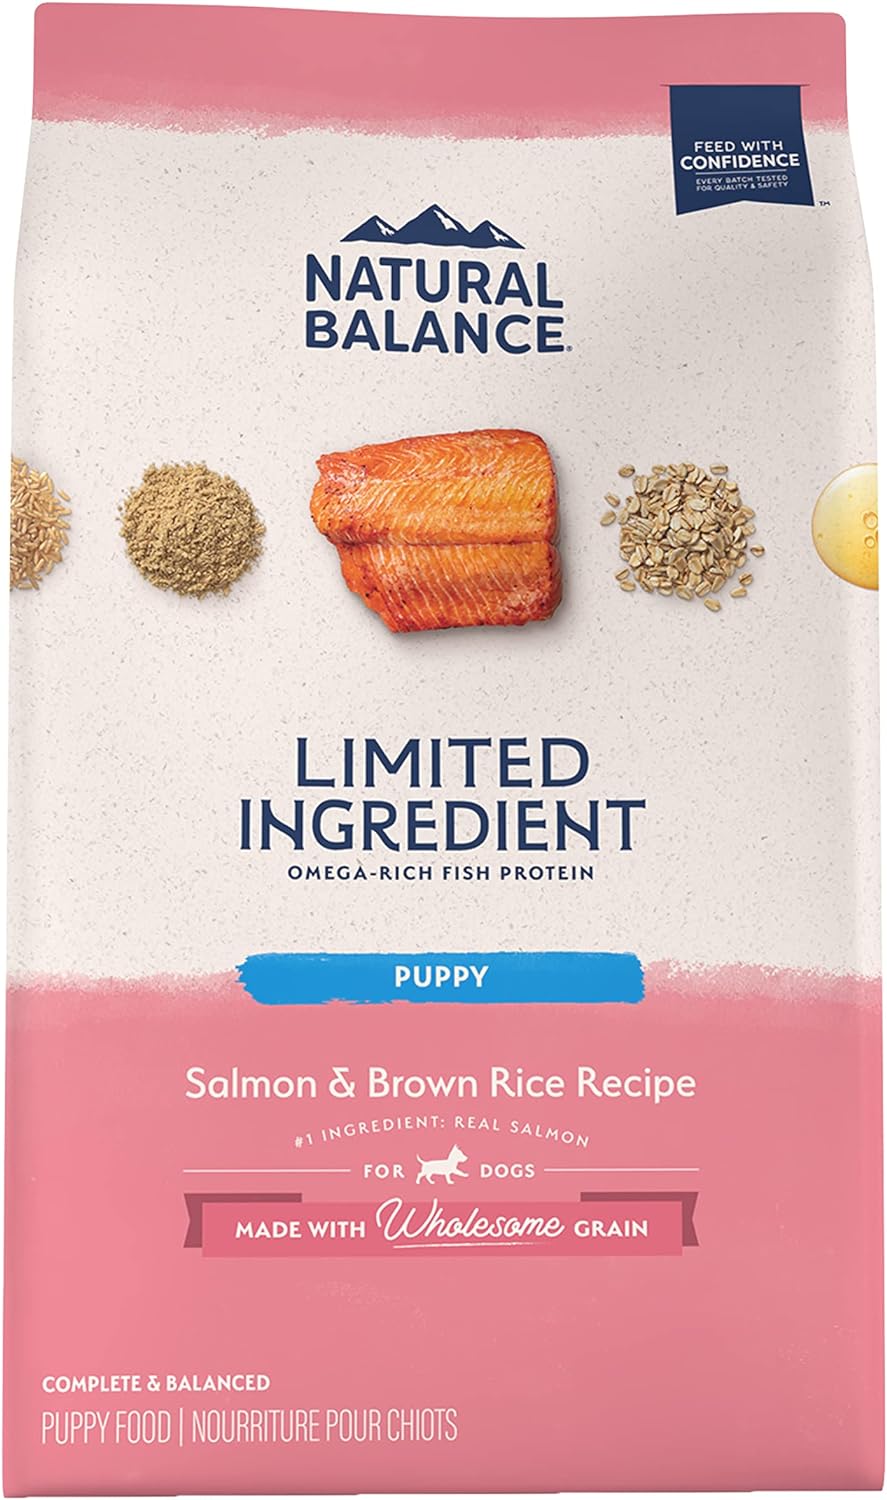 Natural Balance Limited Ingredient Puppy Dry Dog Food with Healthy Grains, Salmon & Brown Rice Recipe, 4 Pound (Pack of 1)